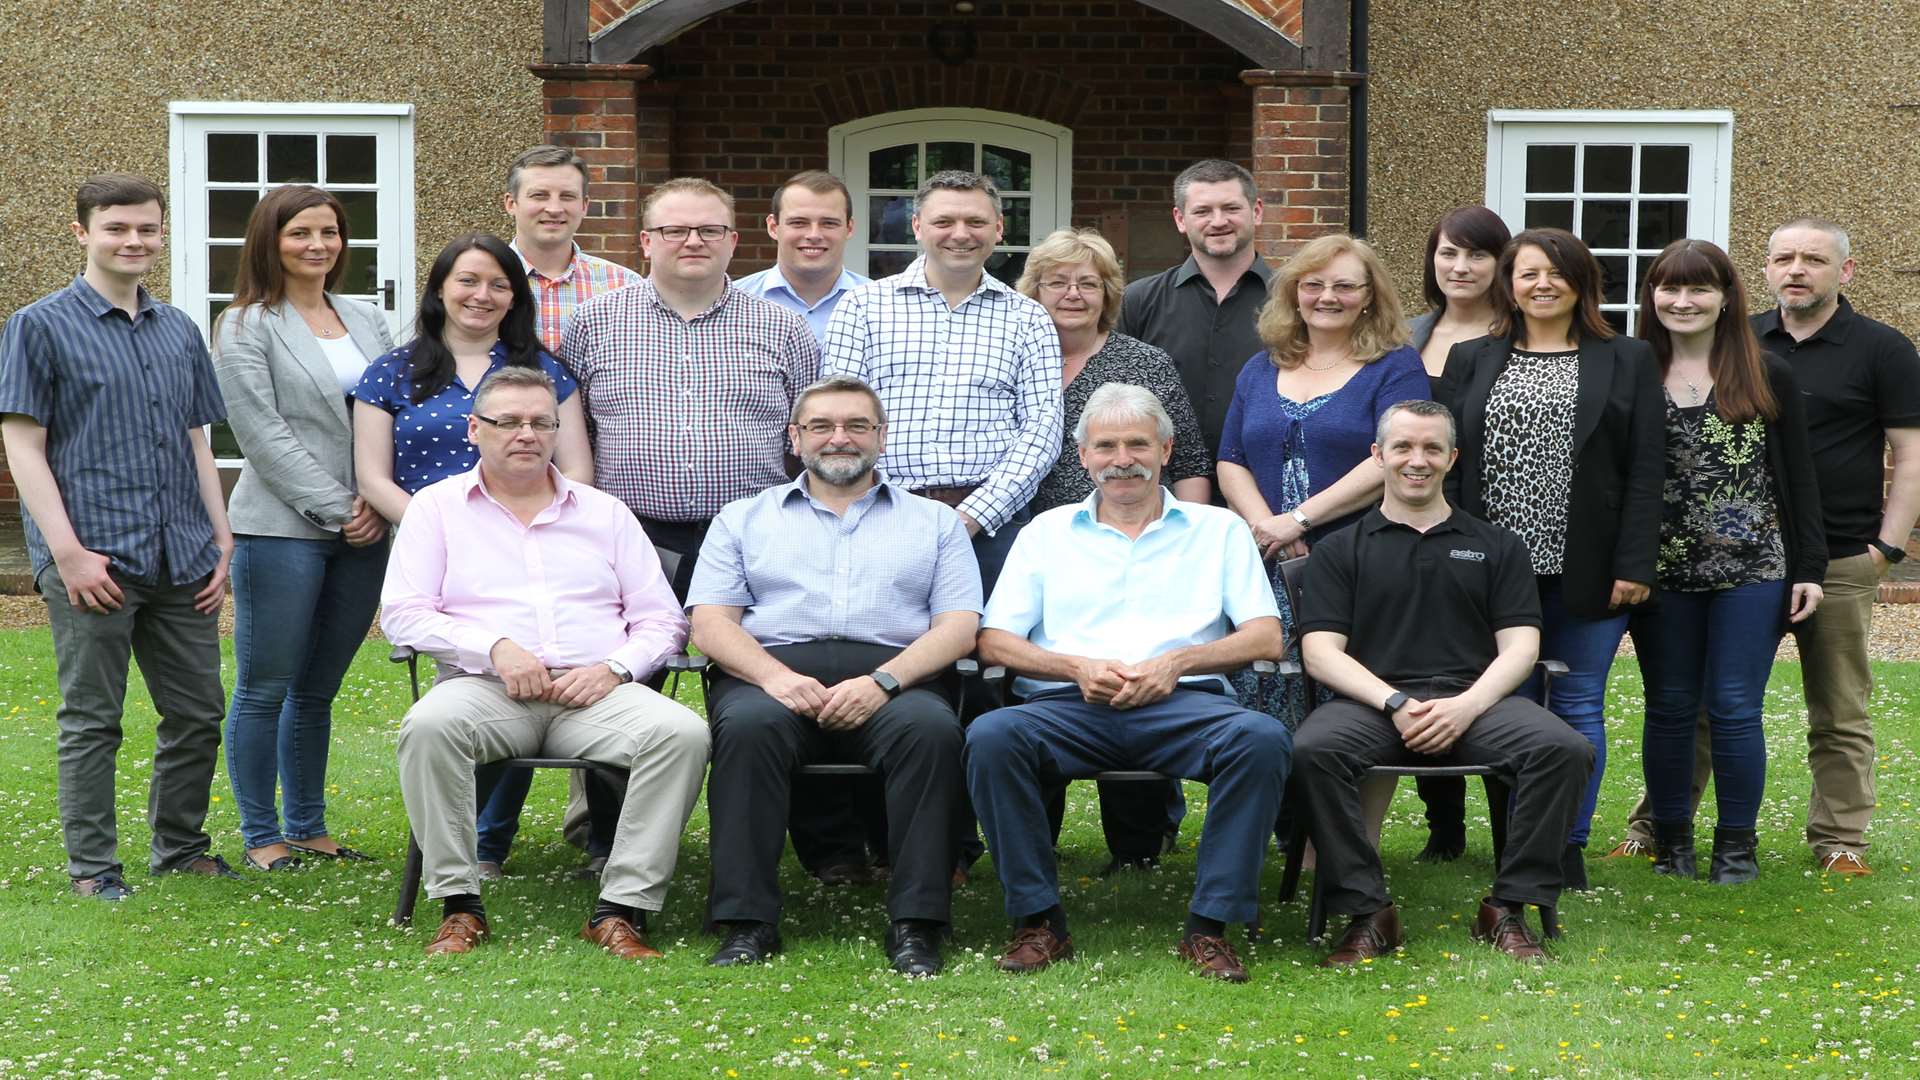 The team at Astro Communications